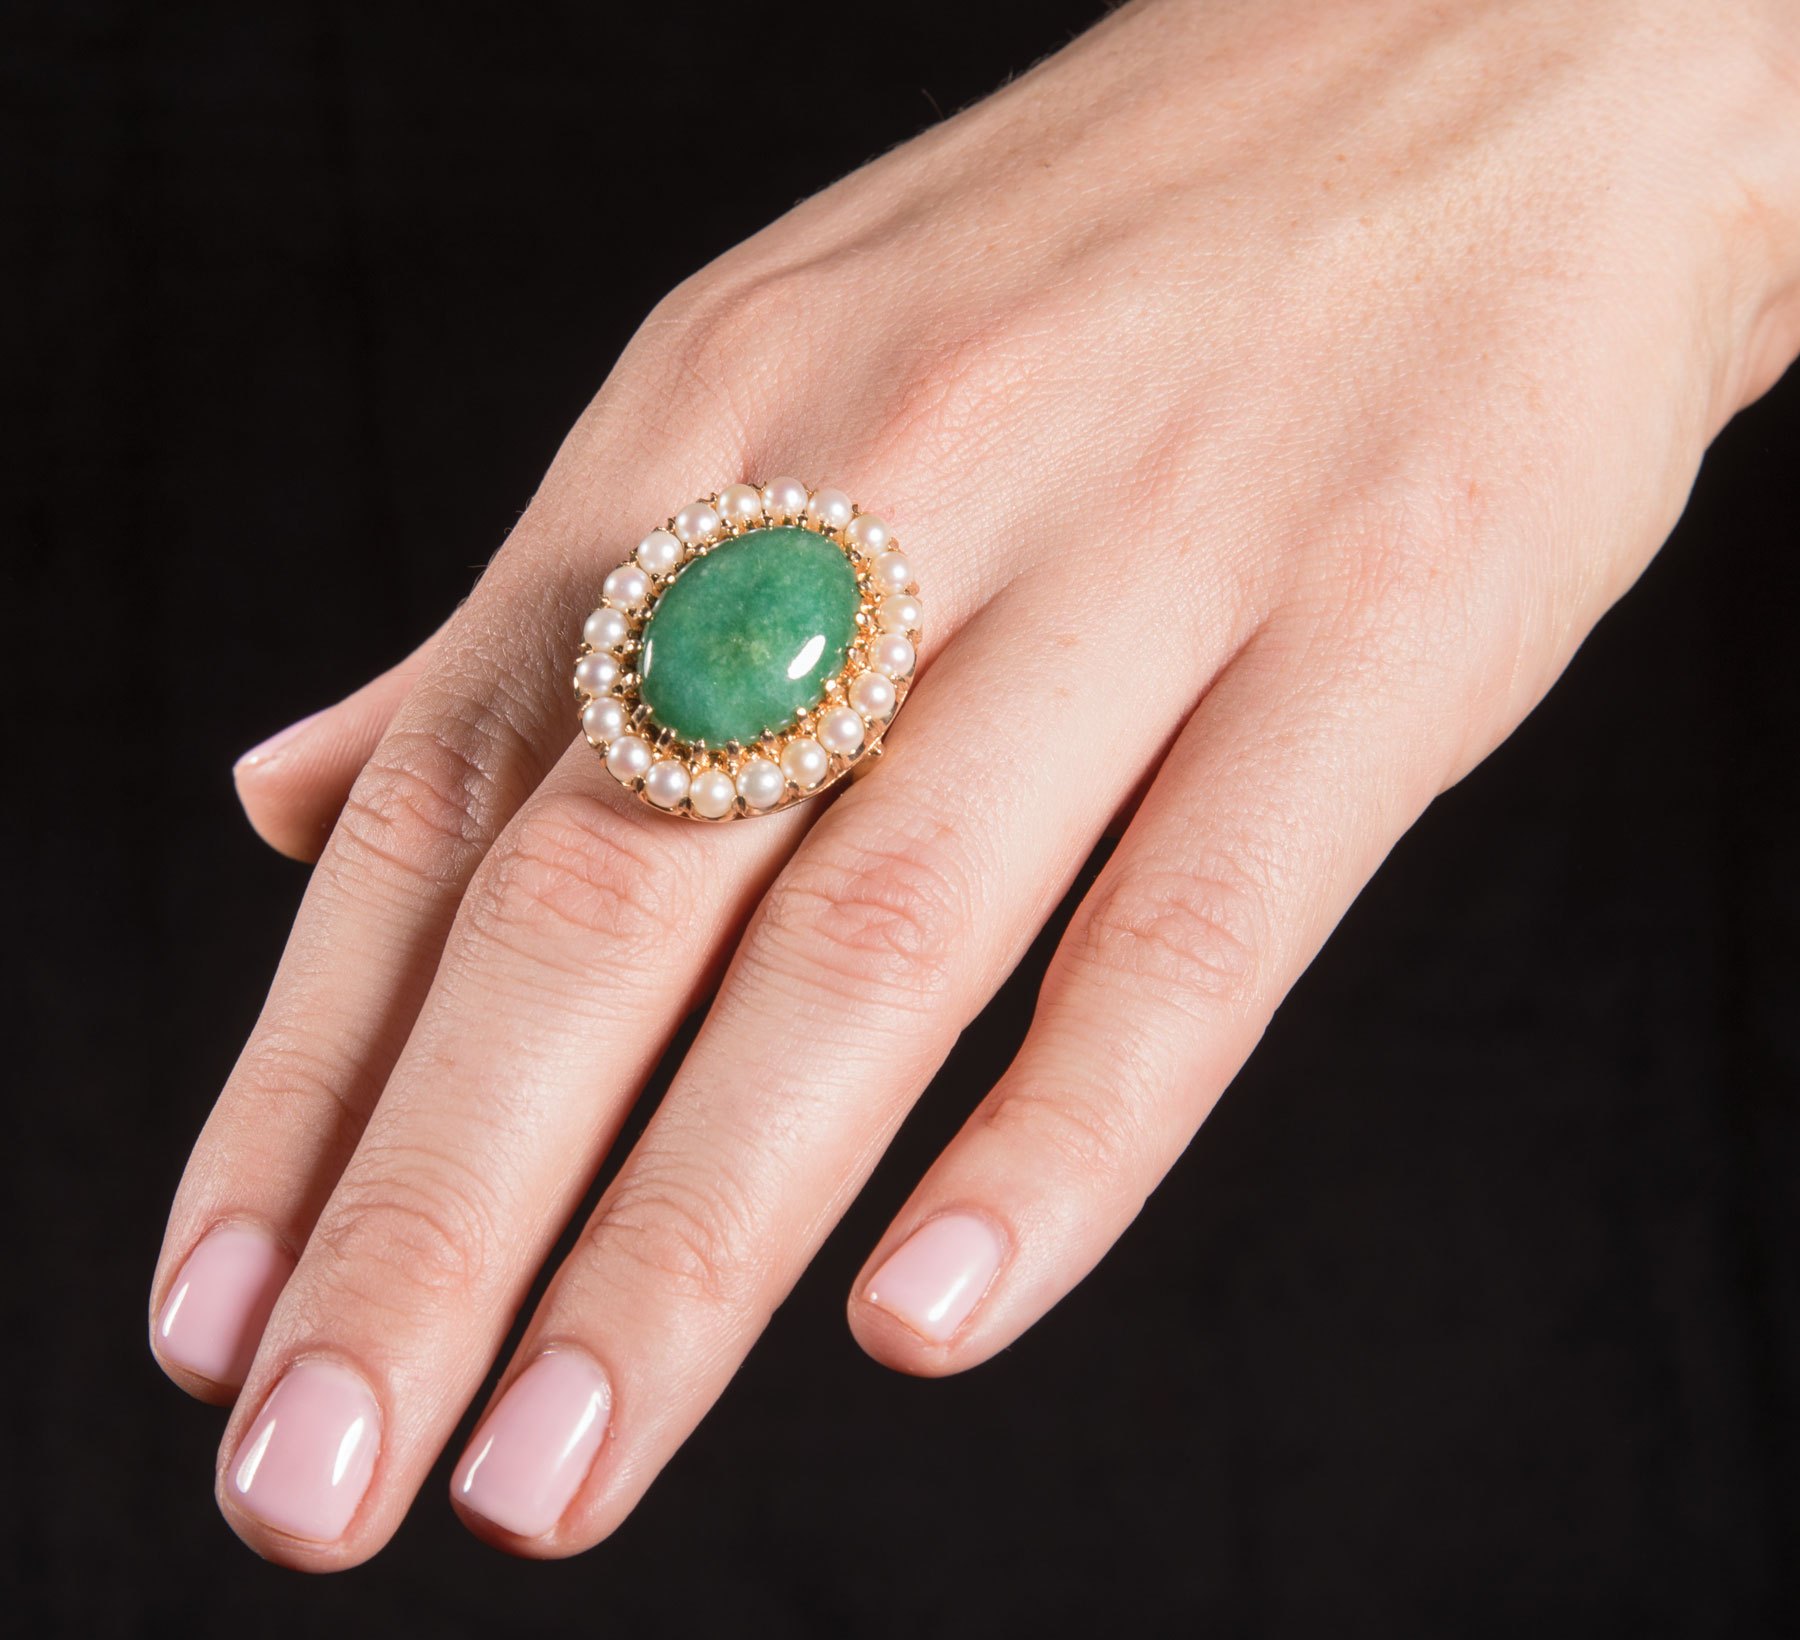 14 kt. Yellow Gold, Jadeite and Pearl Ring , prong set oval cabochon jadeite, (20.00 x 14.00) 4.20 - Image 2 of 3